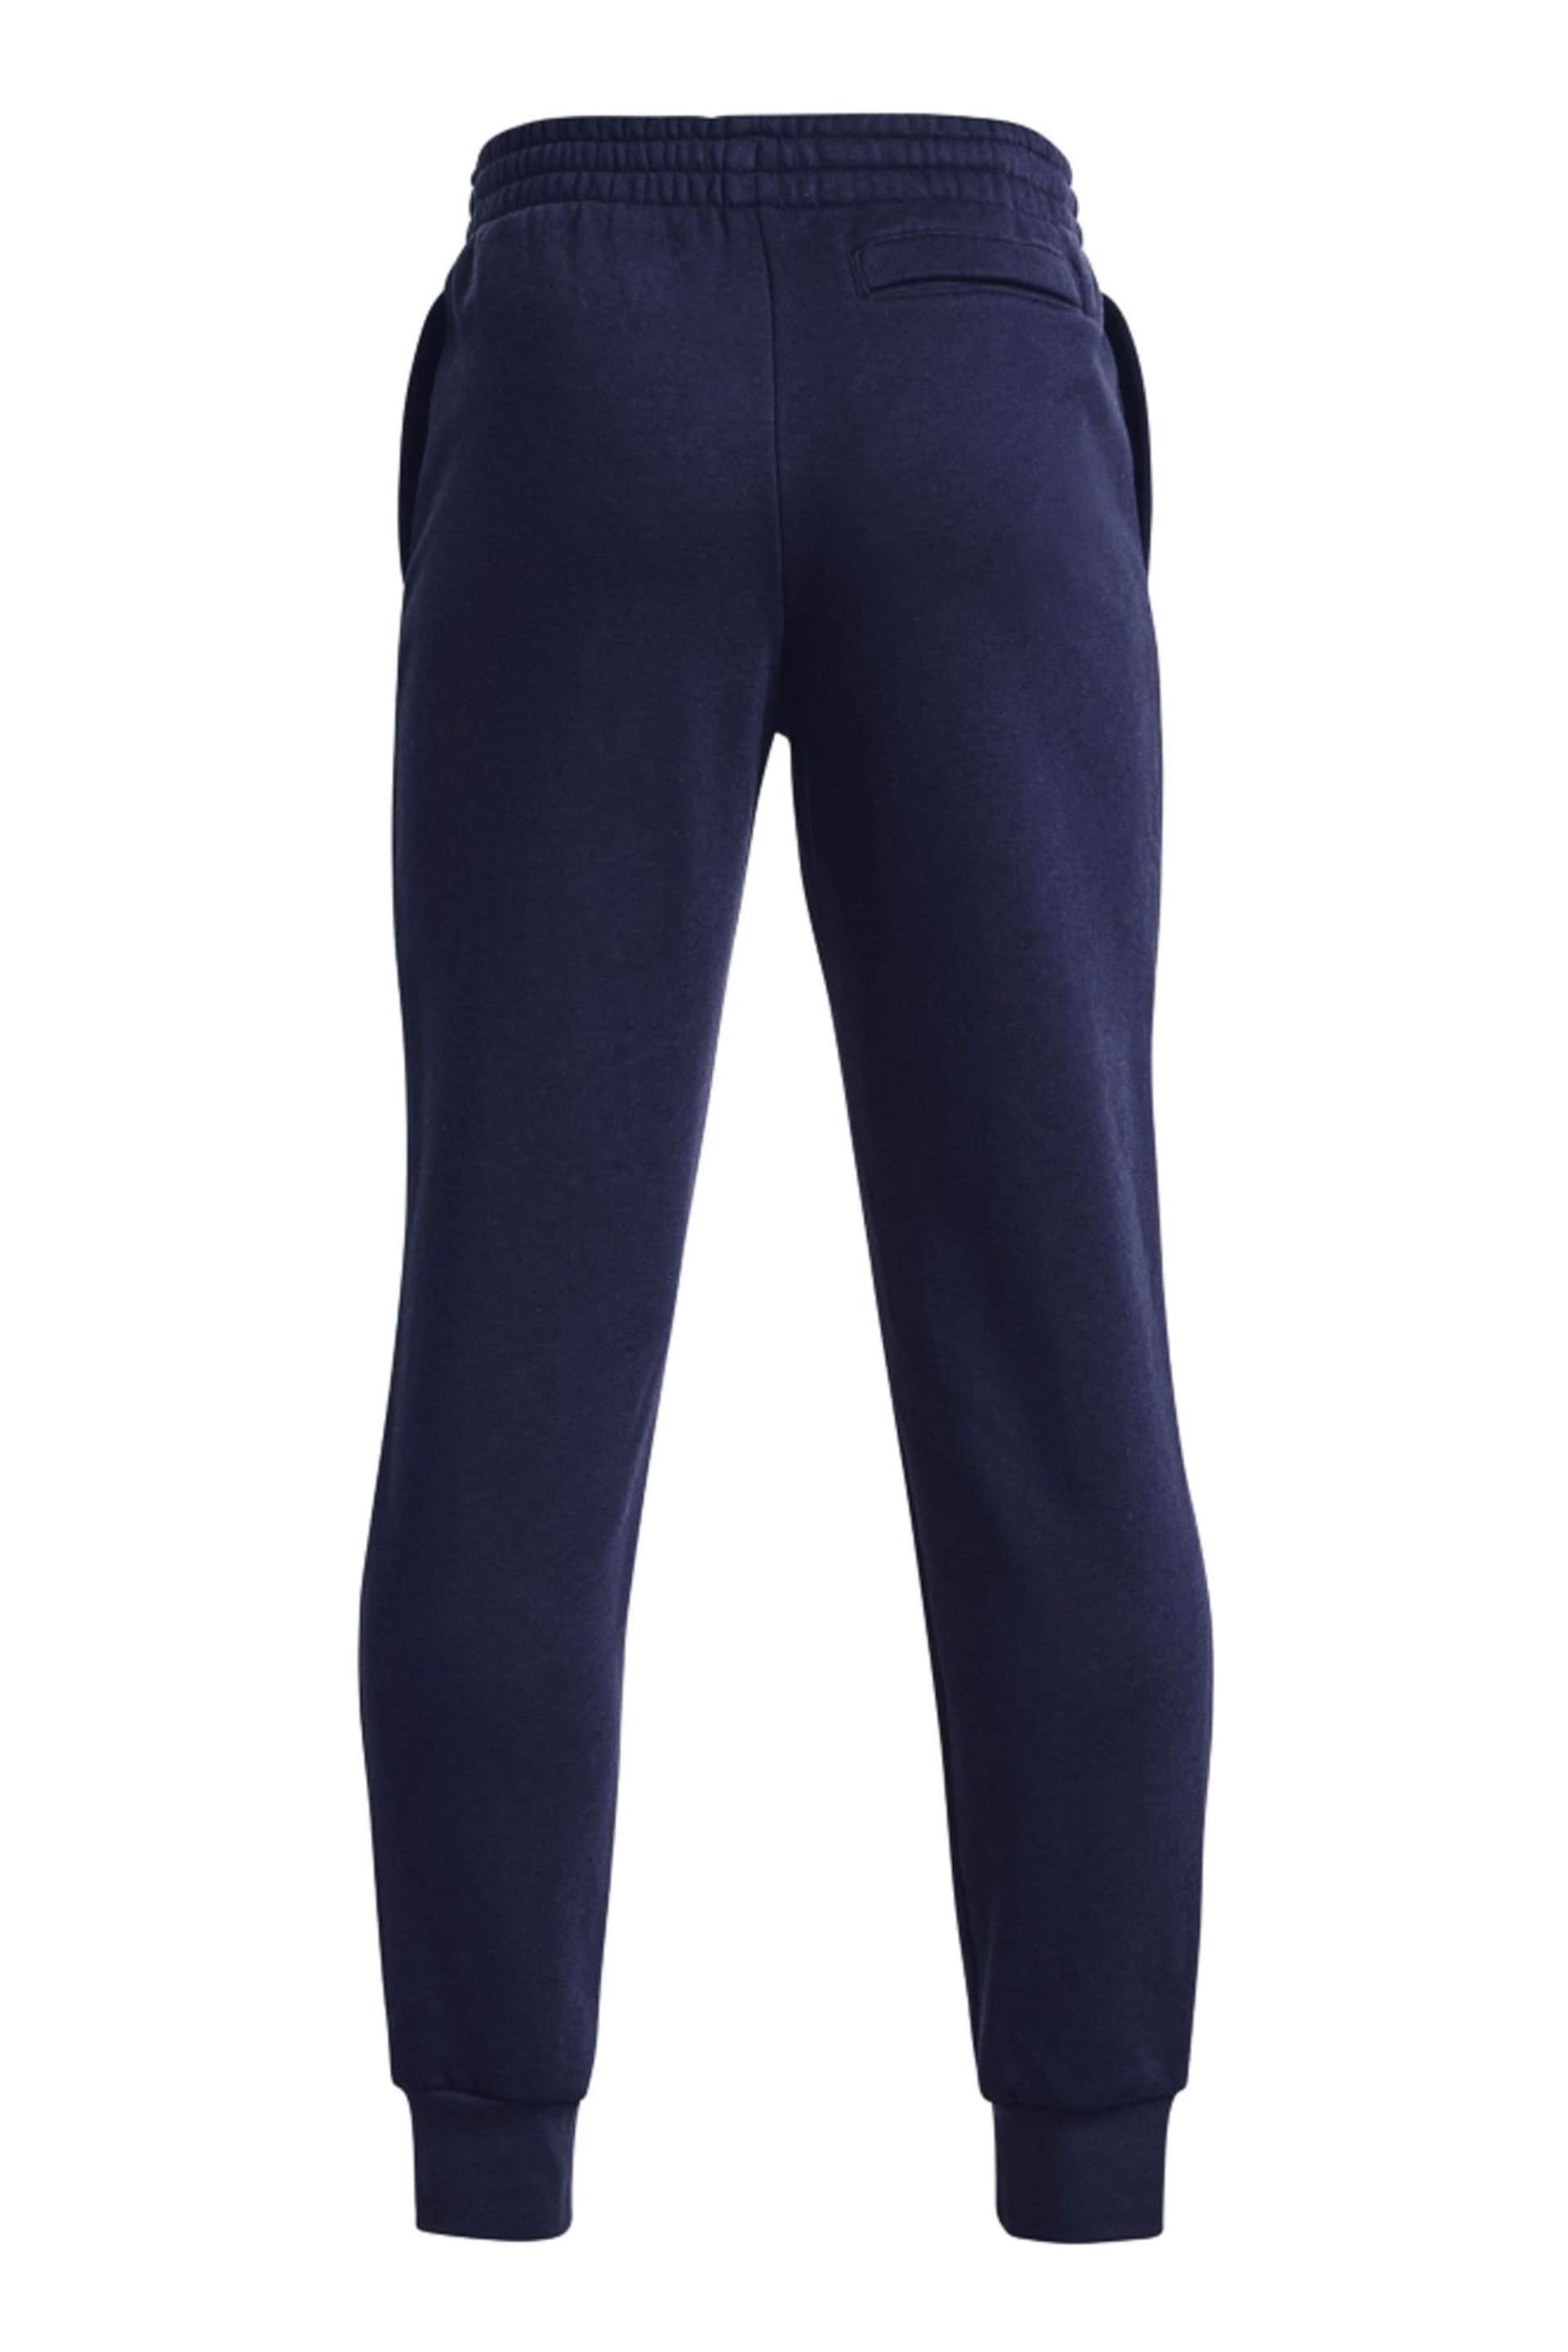 Under Armour Blue Rival Fleece Joggers - Image 6 of 6